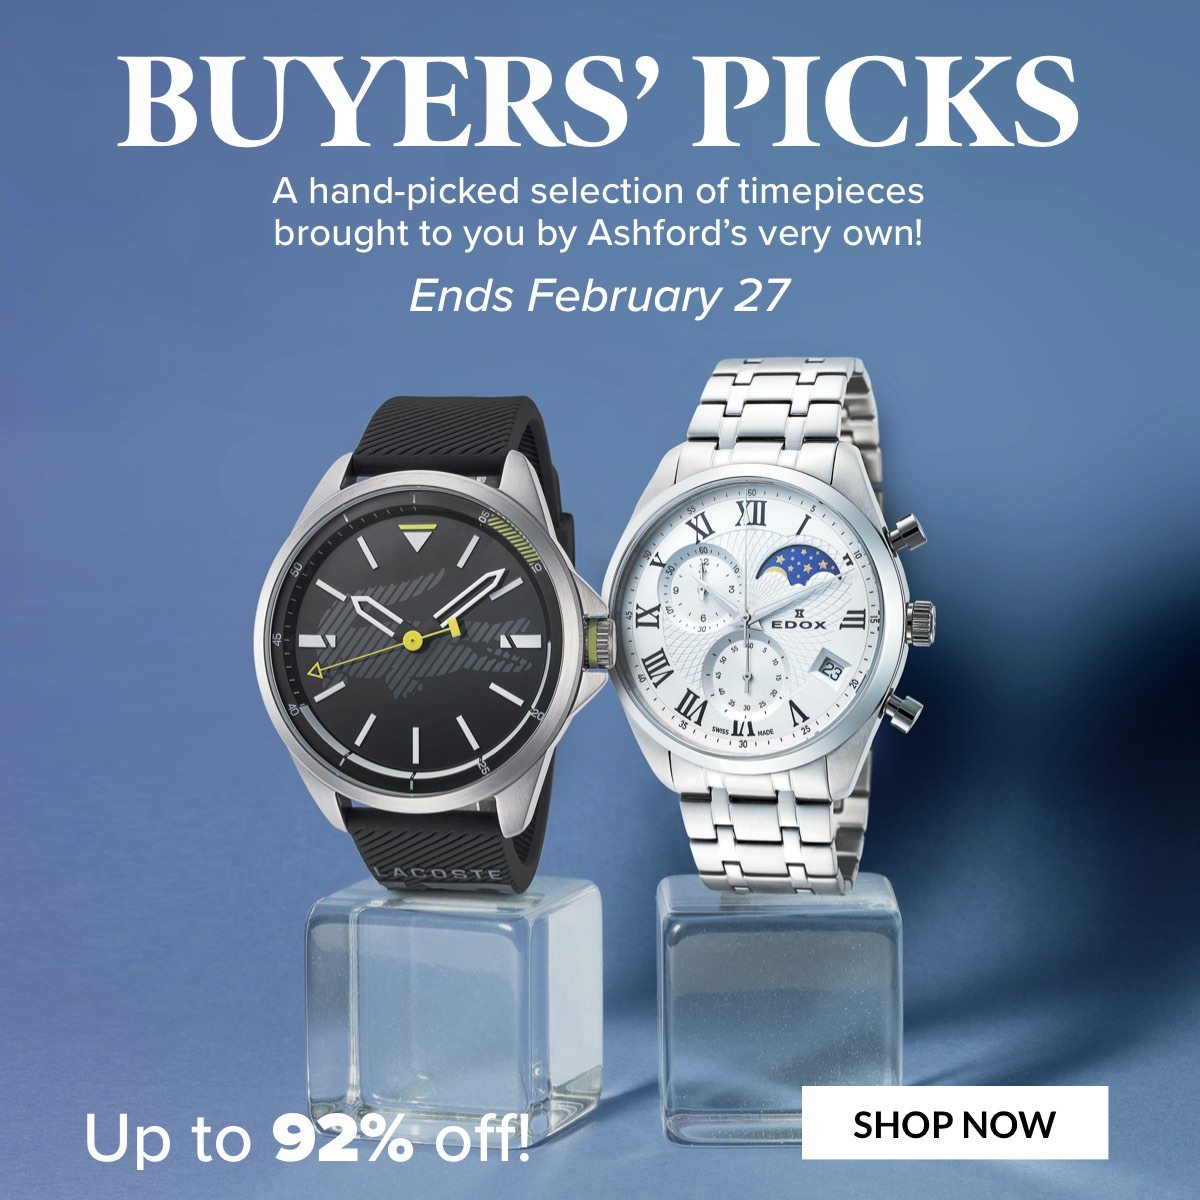 Buyers' Picks A Hand-Picked Selection of Timepieces Brought to you by Ashfords' very own! Up to 92% in Savings! Ends February 27